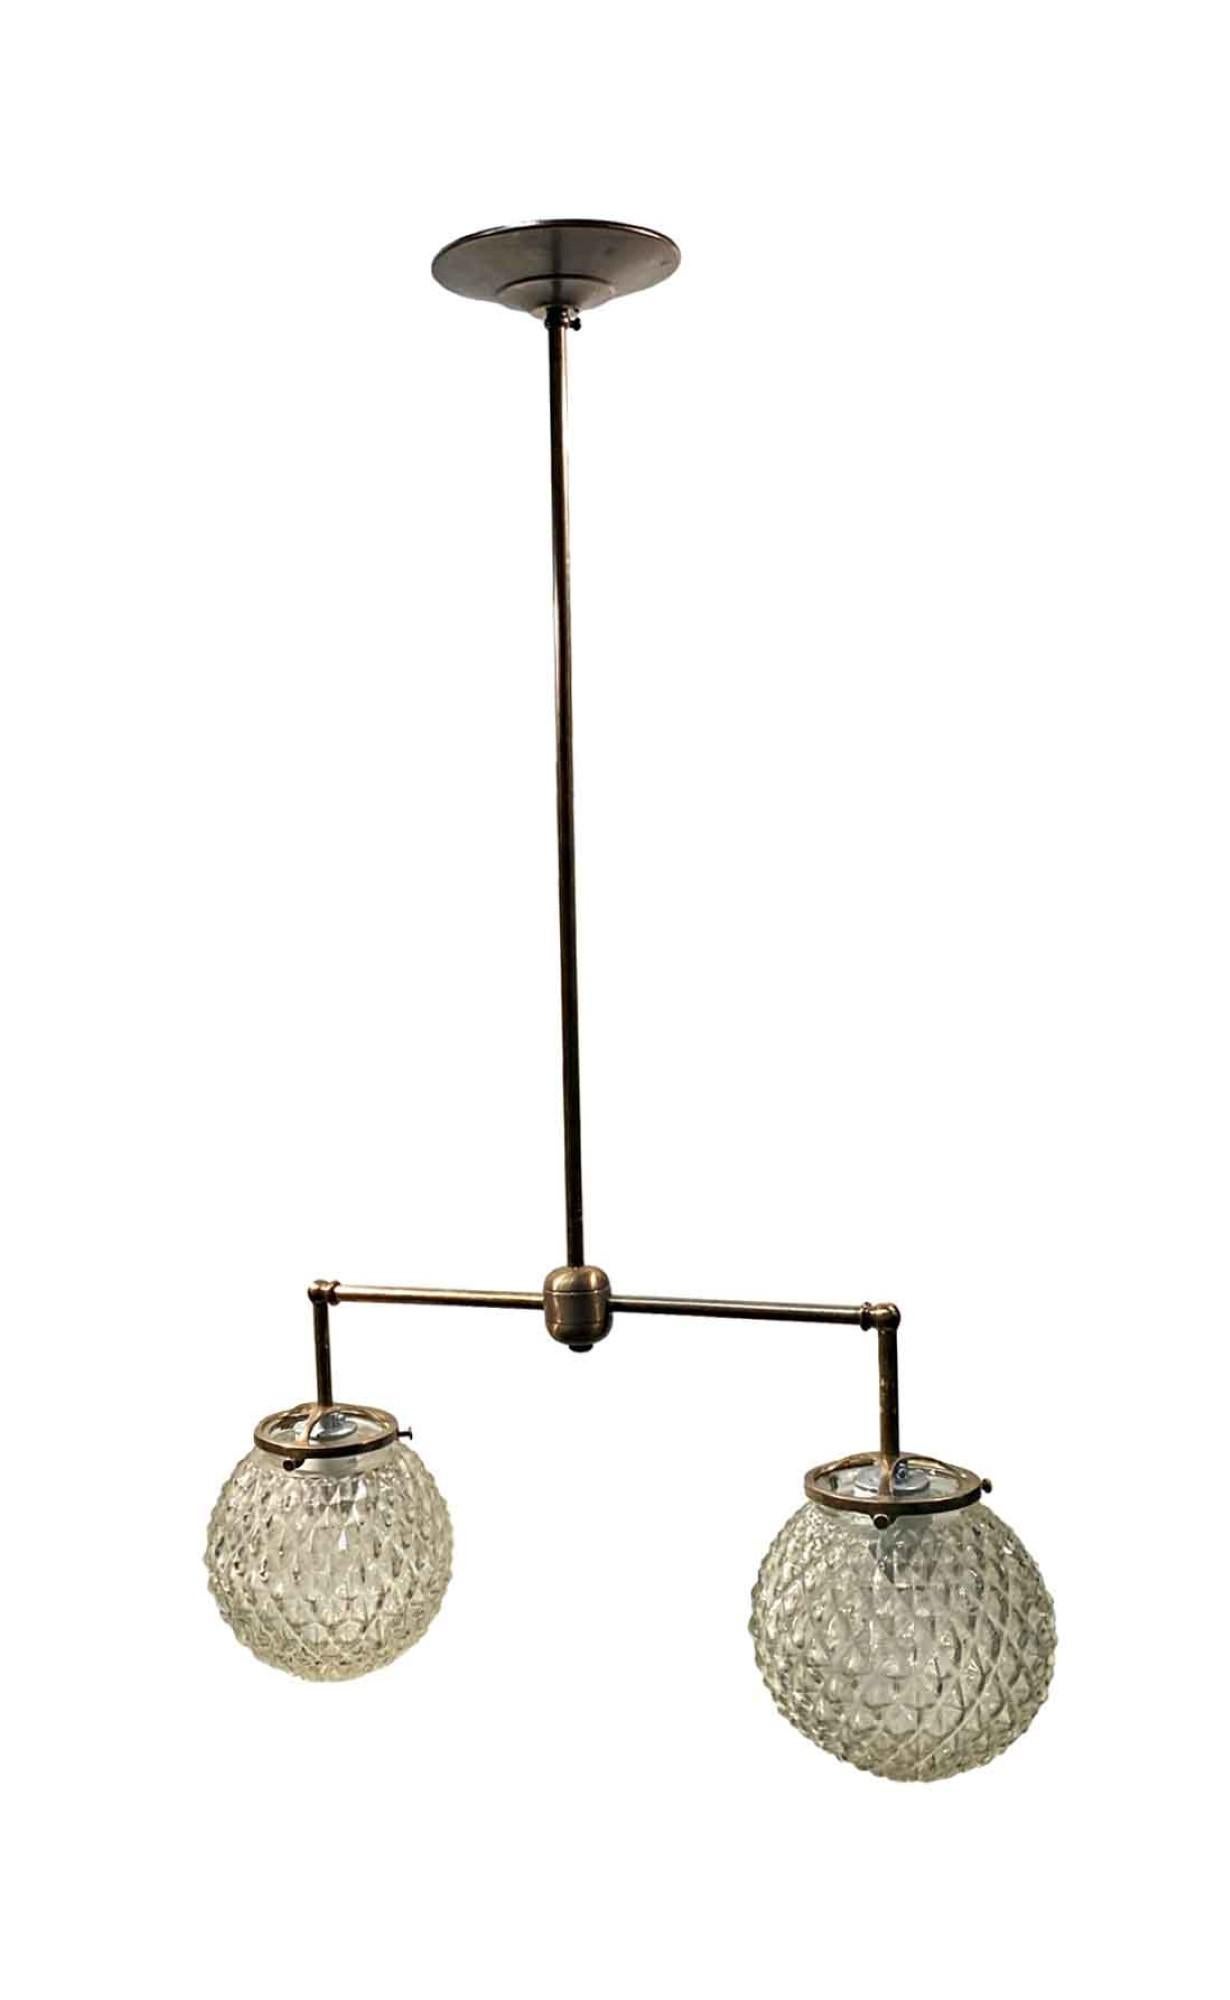 Mid-Century Modern textured cast glass 6 inch diameter globes from the 1990s configured on a new double socket brass pole fitter. Fitter available in either brass, nickel or brushed steel. Price includes restoration.